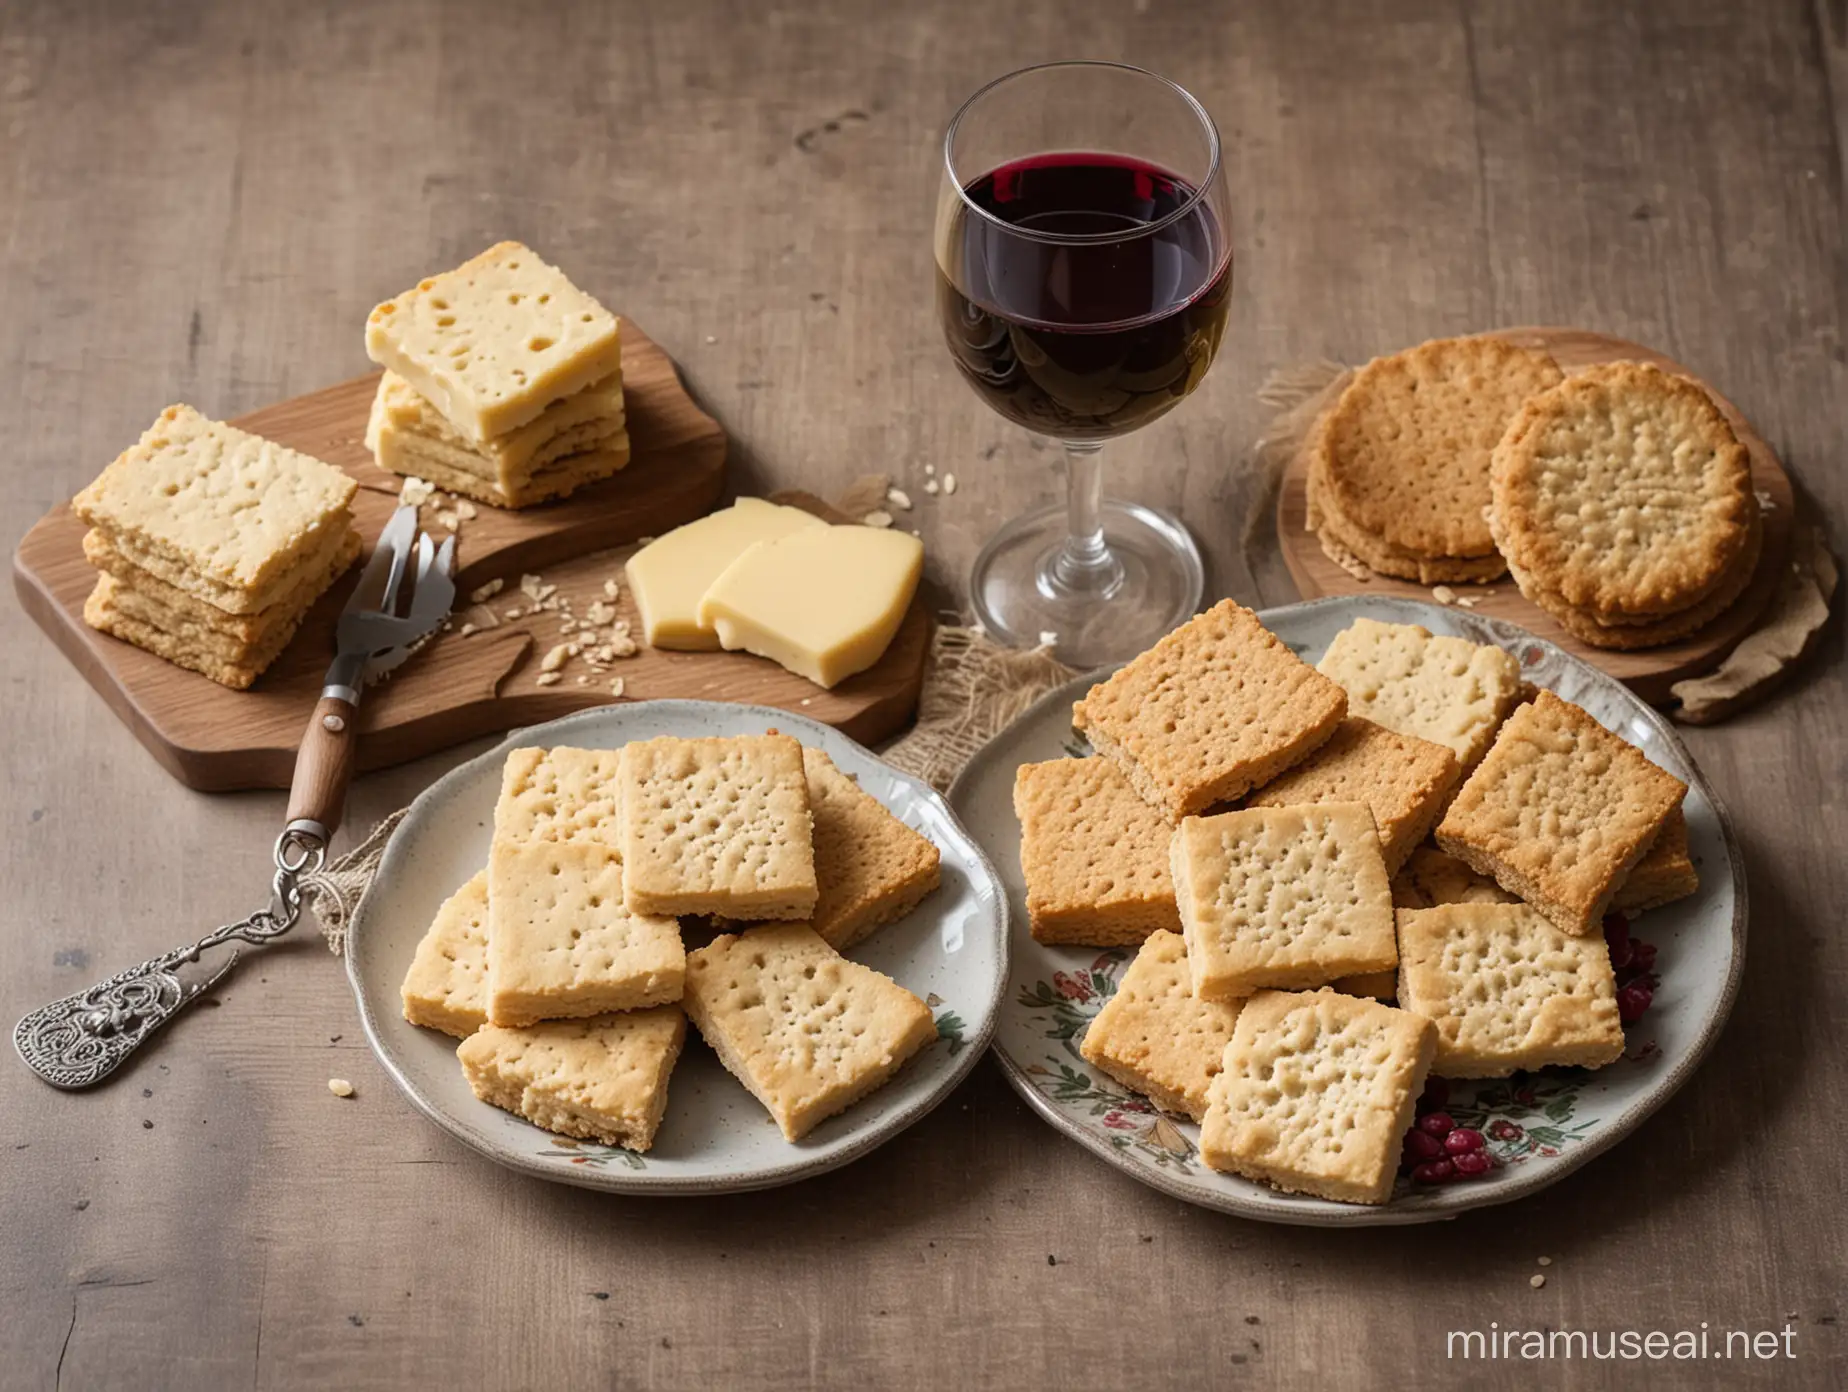 An image of some shortbread, cheese, wine and oatcakes on a plate in a Scottish setting